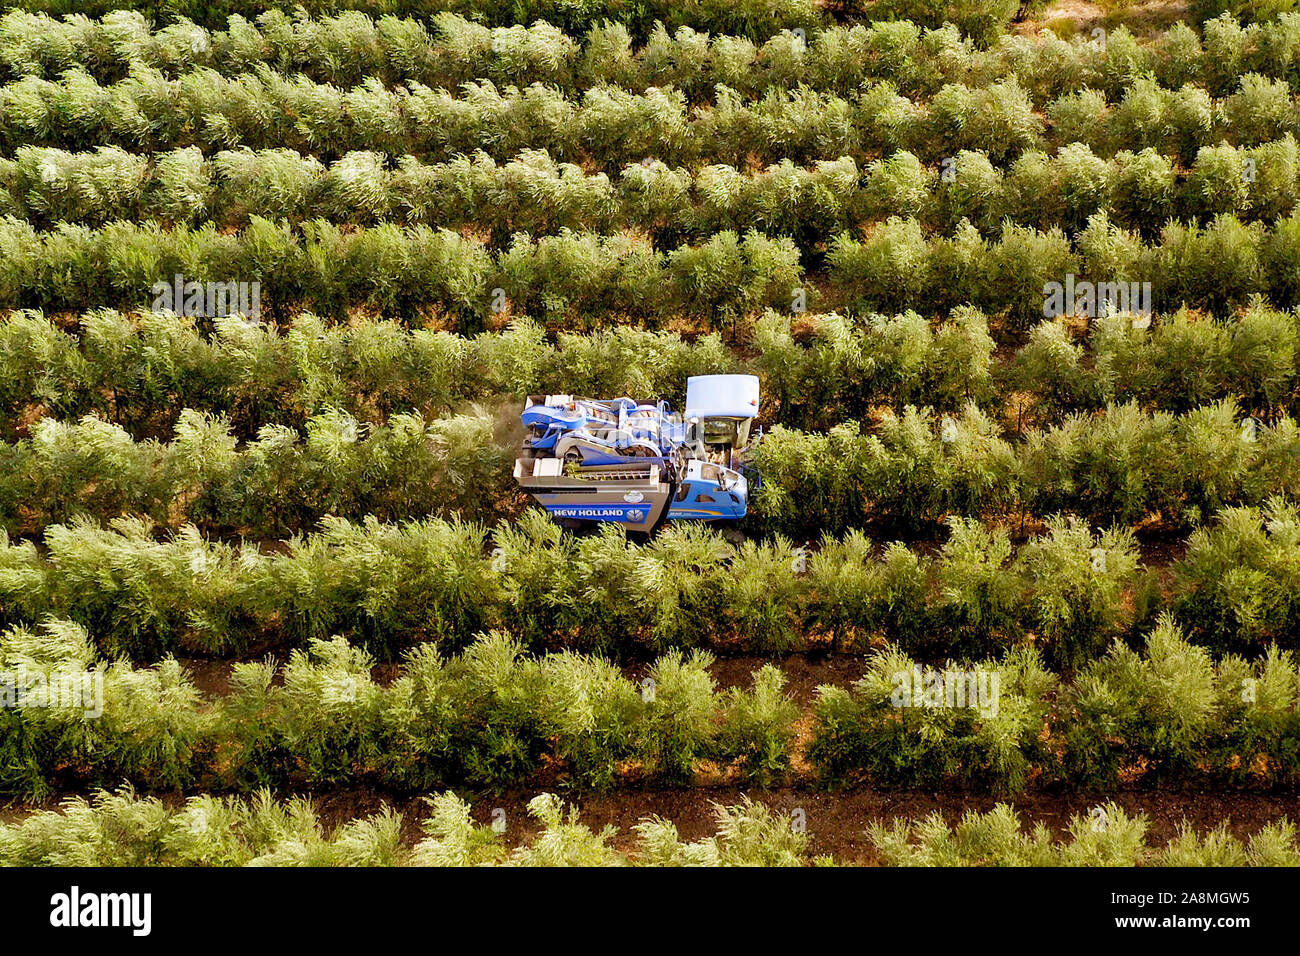 New Holland Olive harvester working in a field, Aerial image. Stock Photo